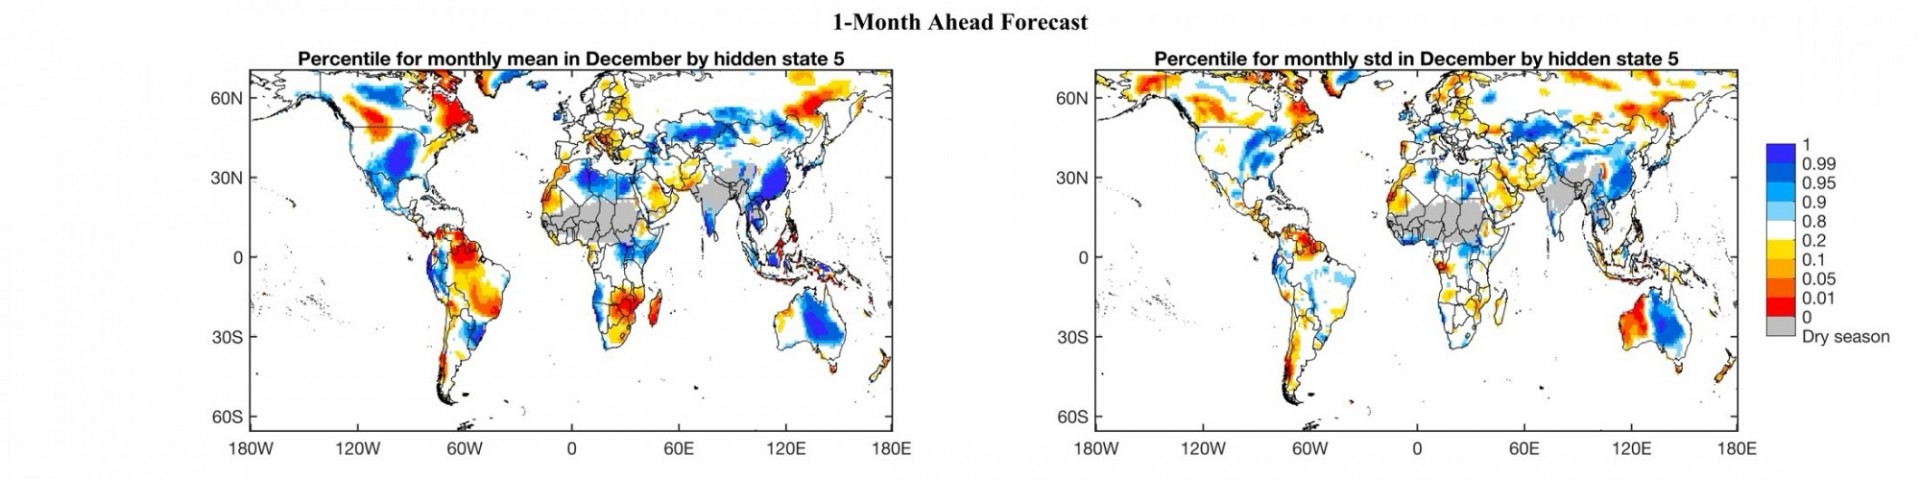 1-Month Ahead Forecast